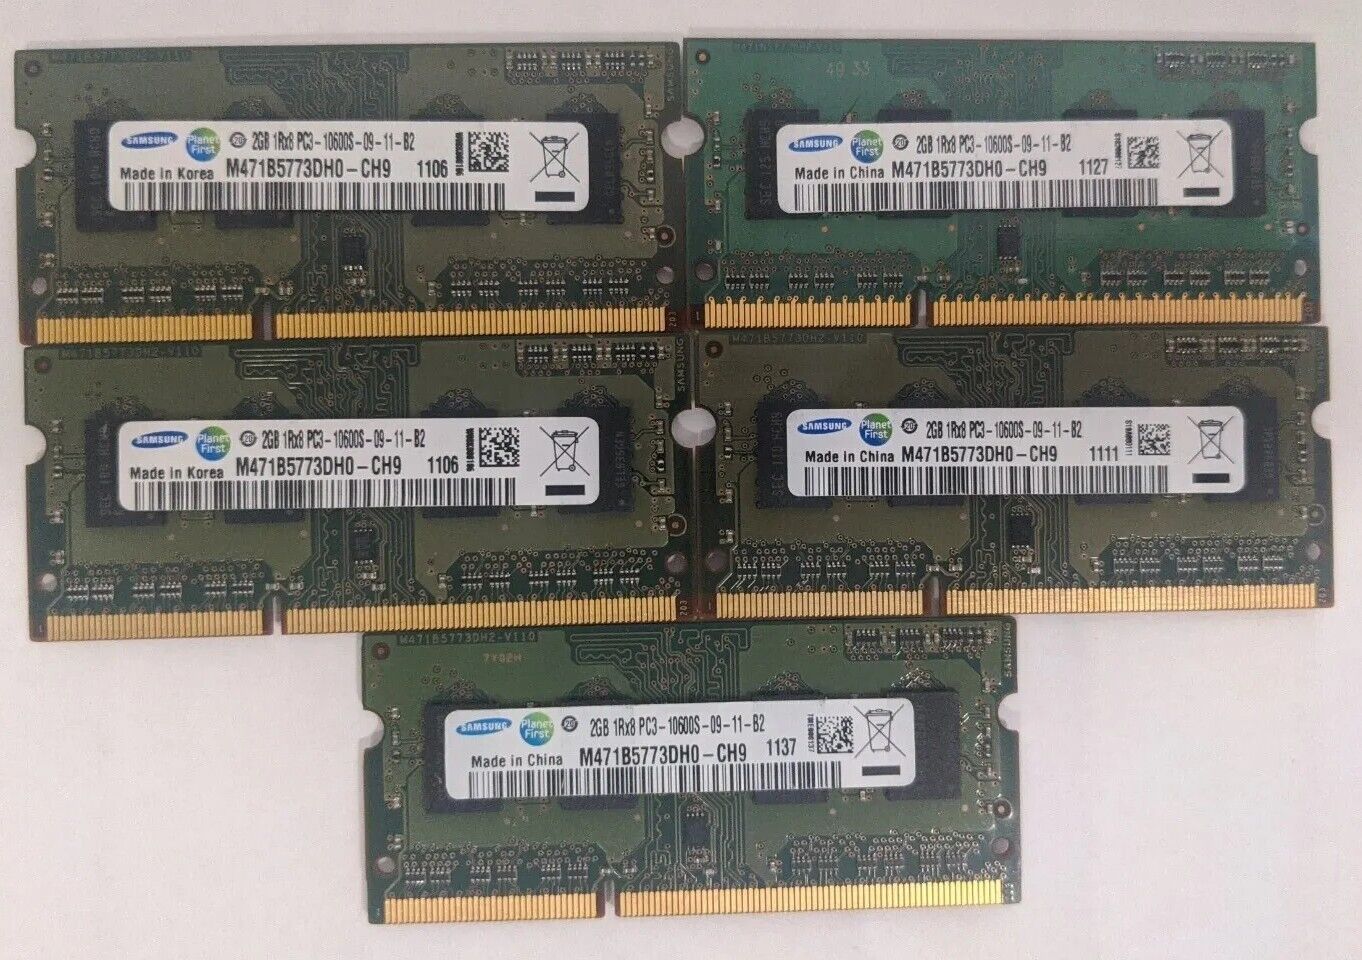 5 x SAMSUNG 2GB 1RX8 PC3-10600S-09-11-B2 MEMORY RAM M471B5773DH0-CH9 lot of 5